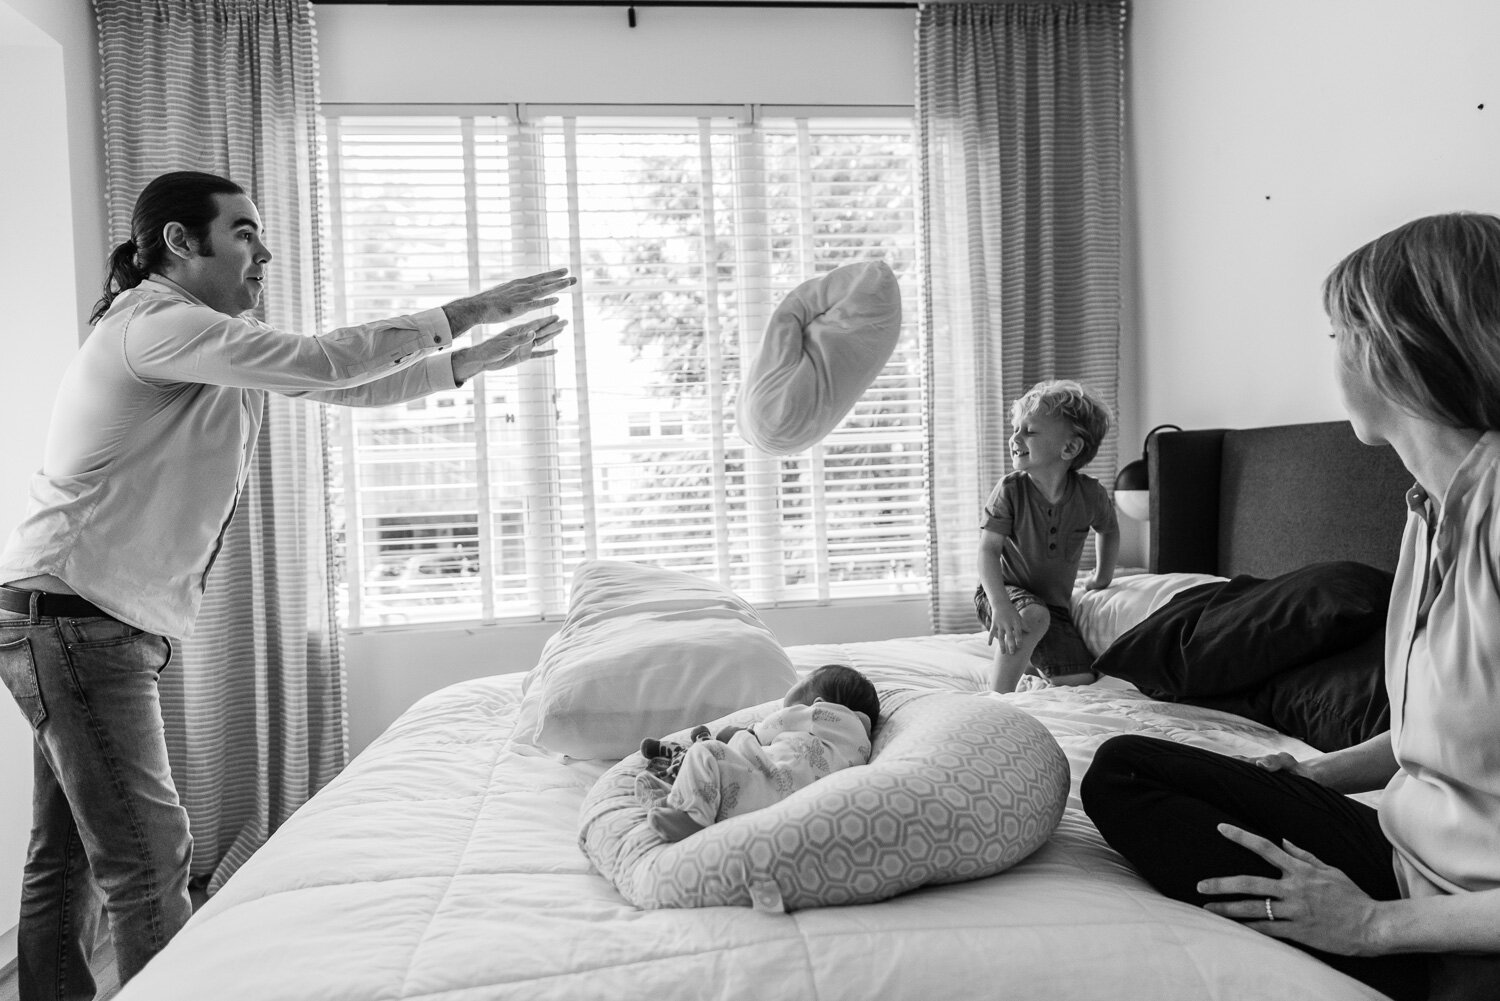 Dad and little boy having a pillow fight with baby sister and mom watching